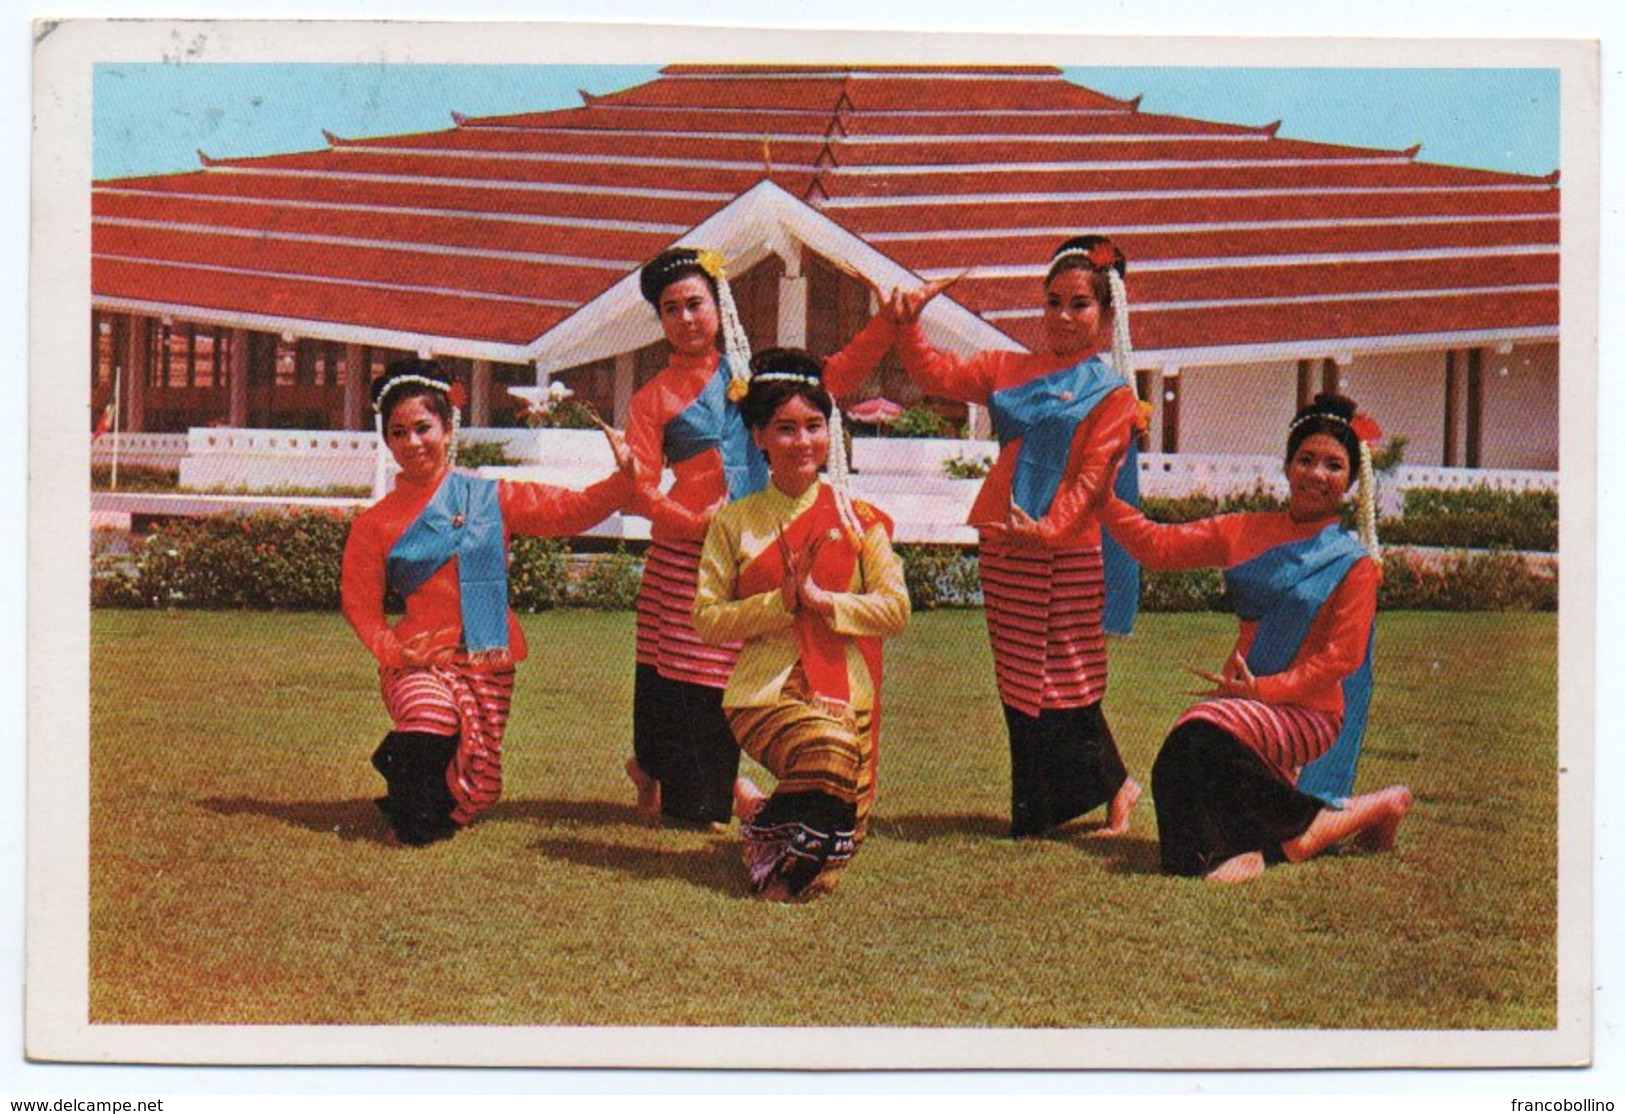 DANCE APPLYING THE FINGER NAILS- NORTH THAILAND / CIRCULATED FROM SUDAN 1978/THEMATIC STAMPS-ARAB POSTAL UNION - Tailandia